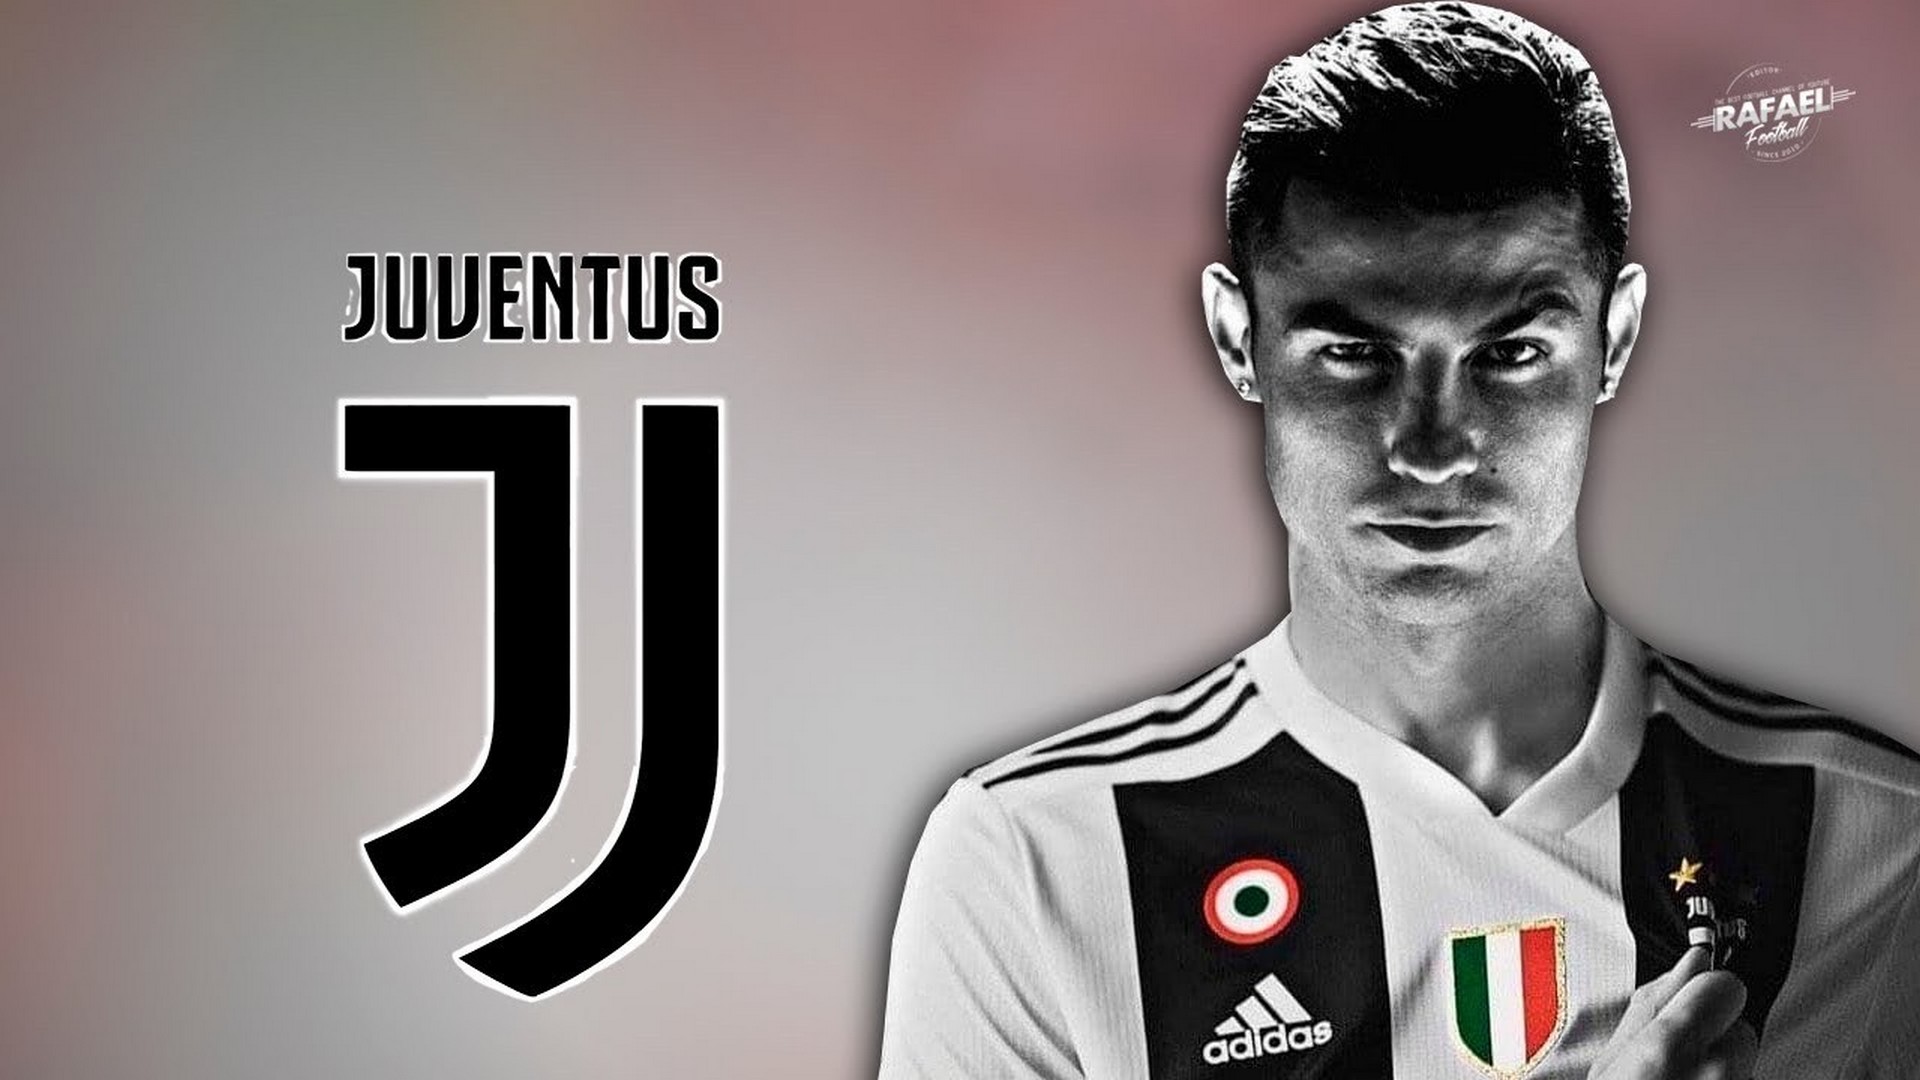 Wallpaper Cristiano Ronaldo Juventus HD With Resolution 1920X1080 pixel. You can make this wallpaper for your Desktop Computer Backgrounds, Mac Wallpapers, Android Lock screen or iPhone Screensavers